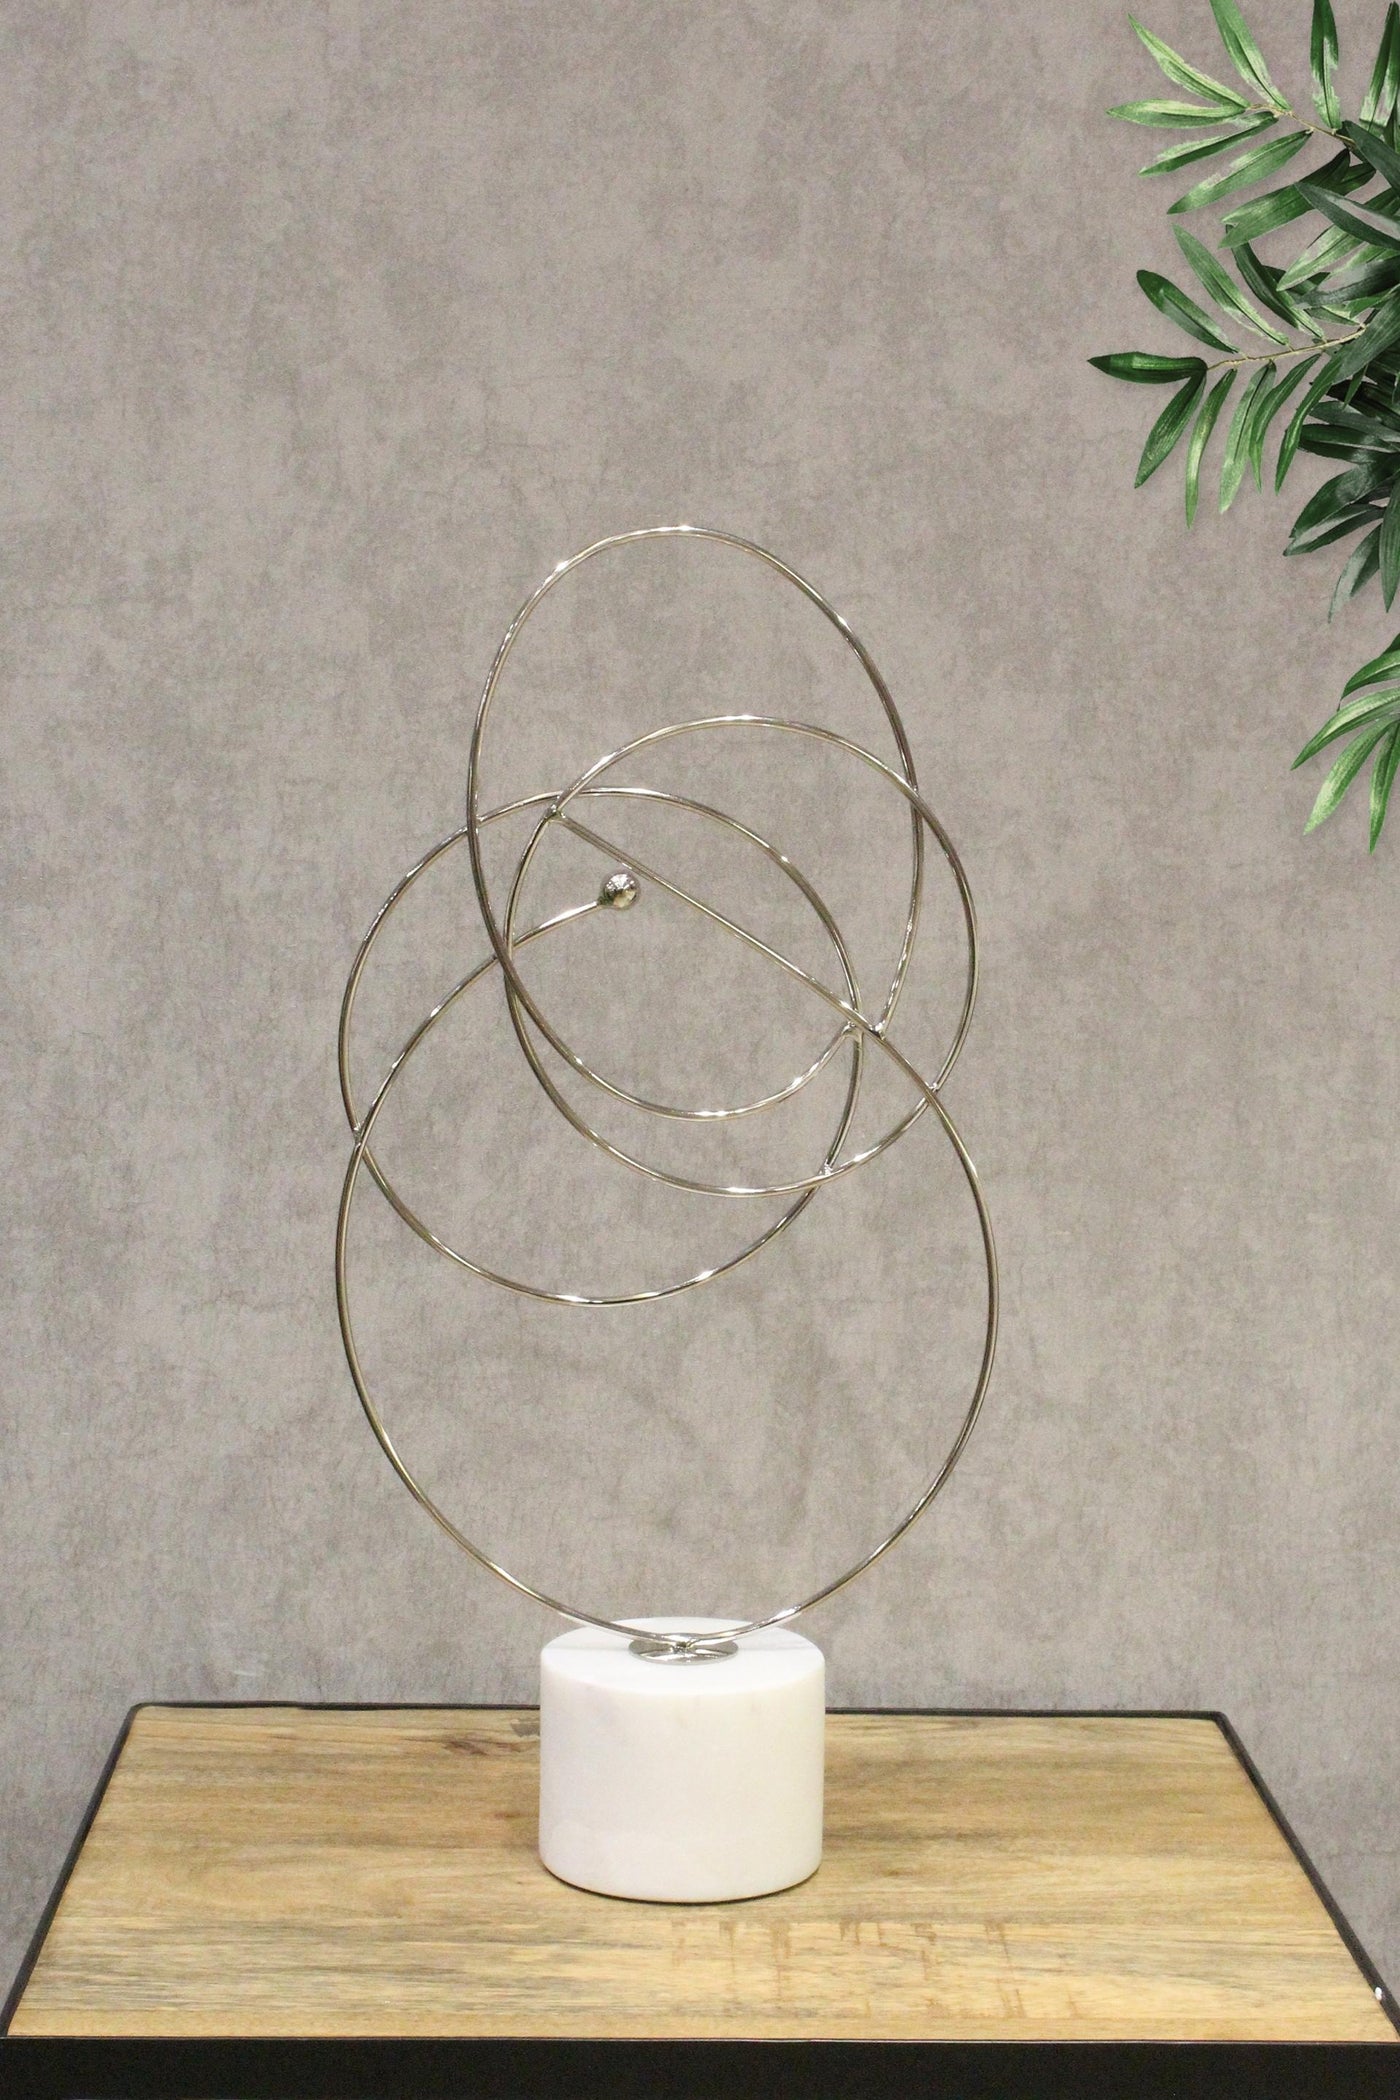 Abstract Scribble Metal Sculpture for your Home or office decor-Large